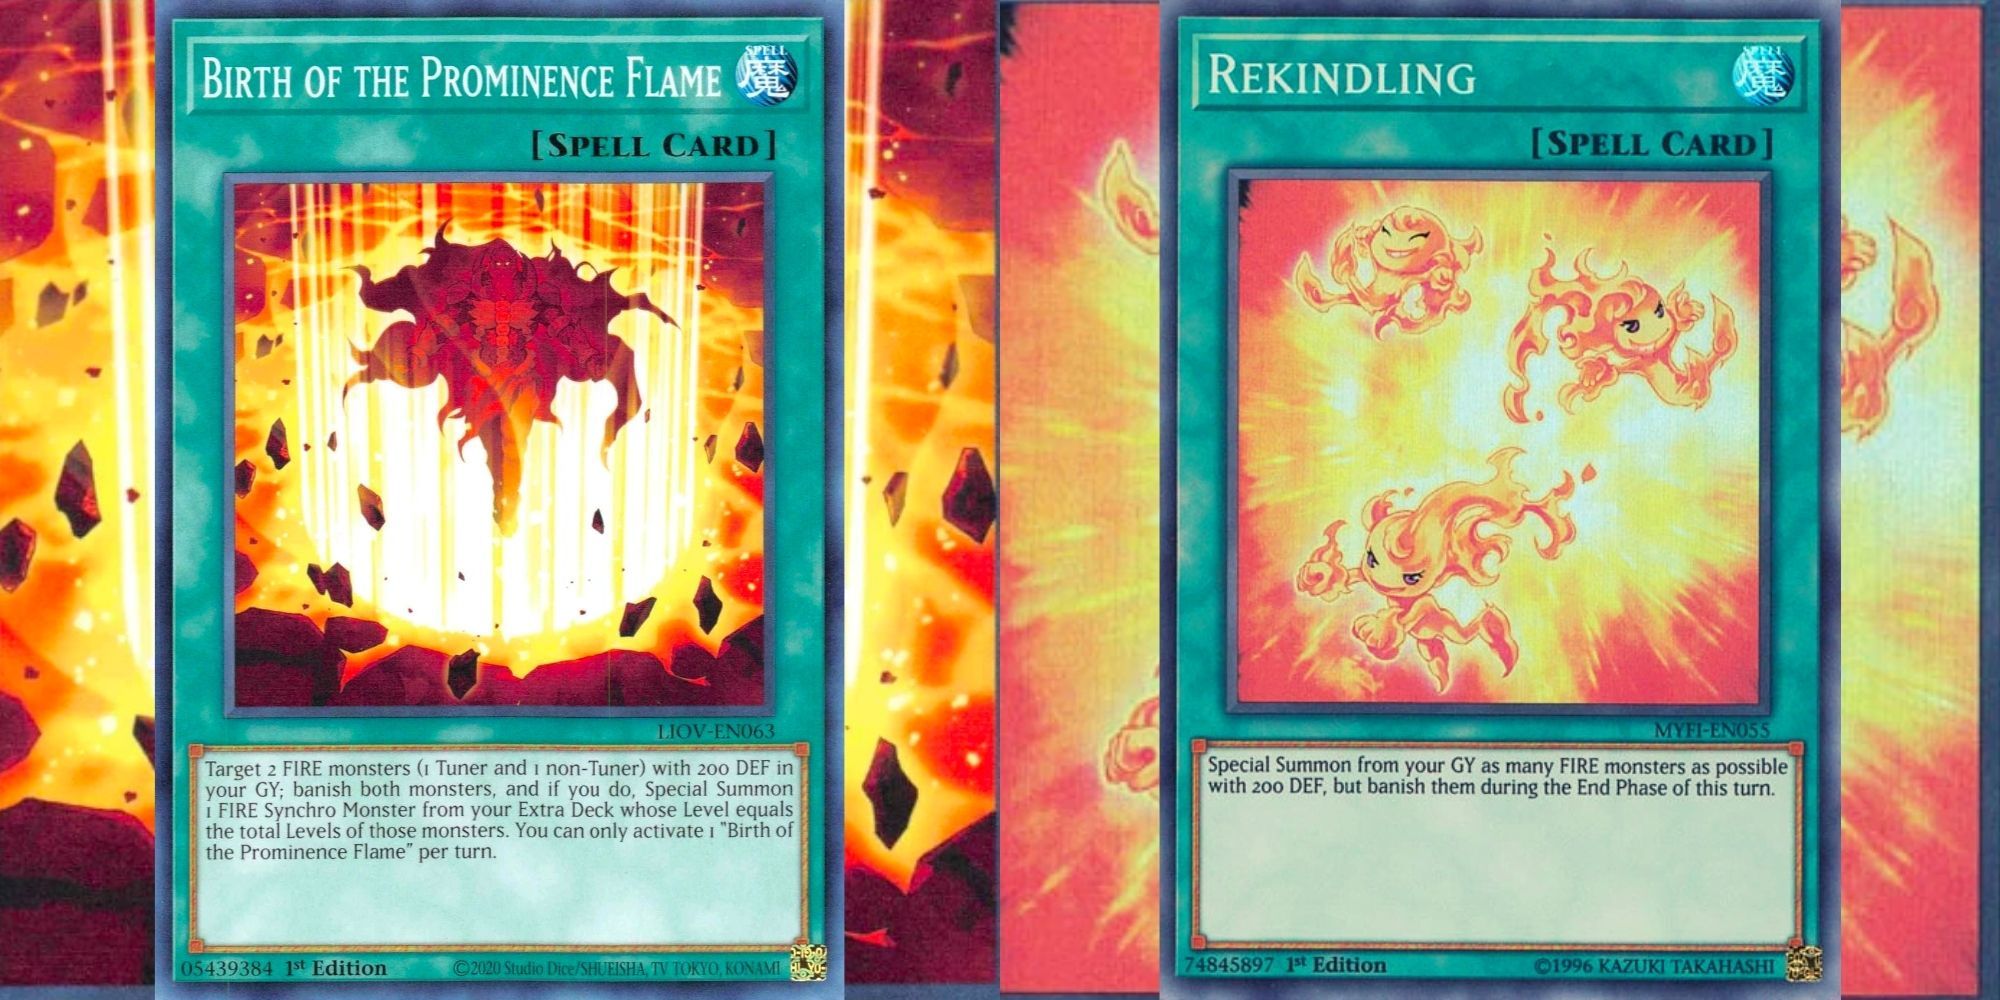 Birth of the Prominence Flame and Rekindling cards in Yu-Gi-Oh!